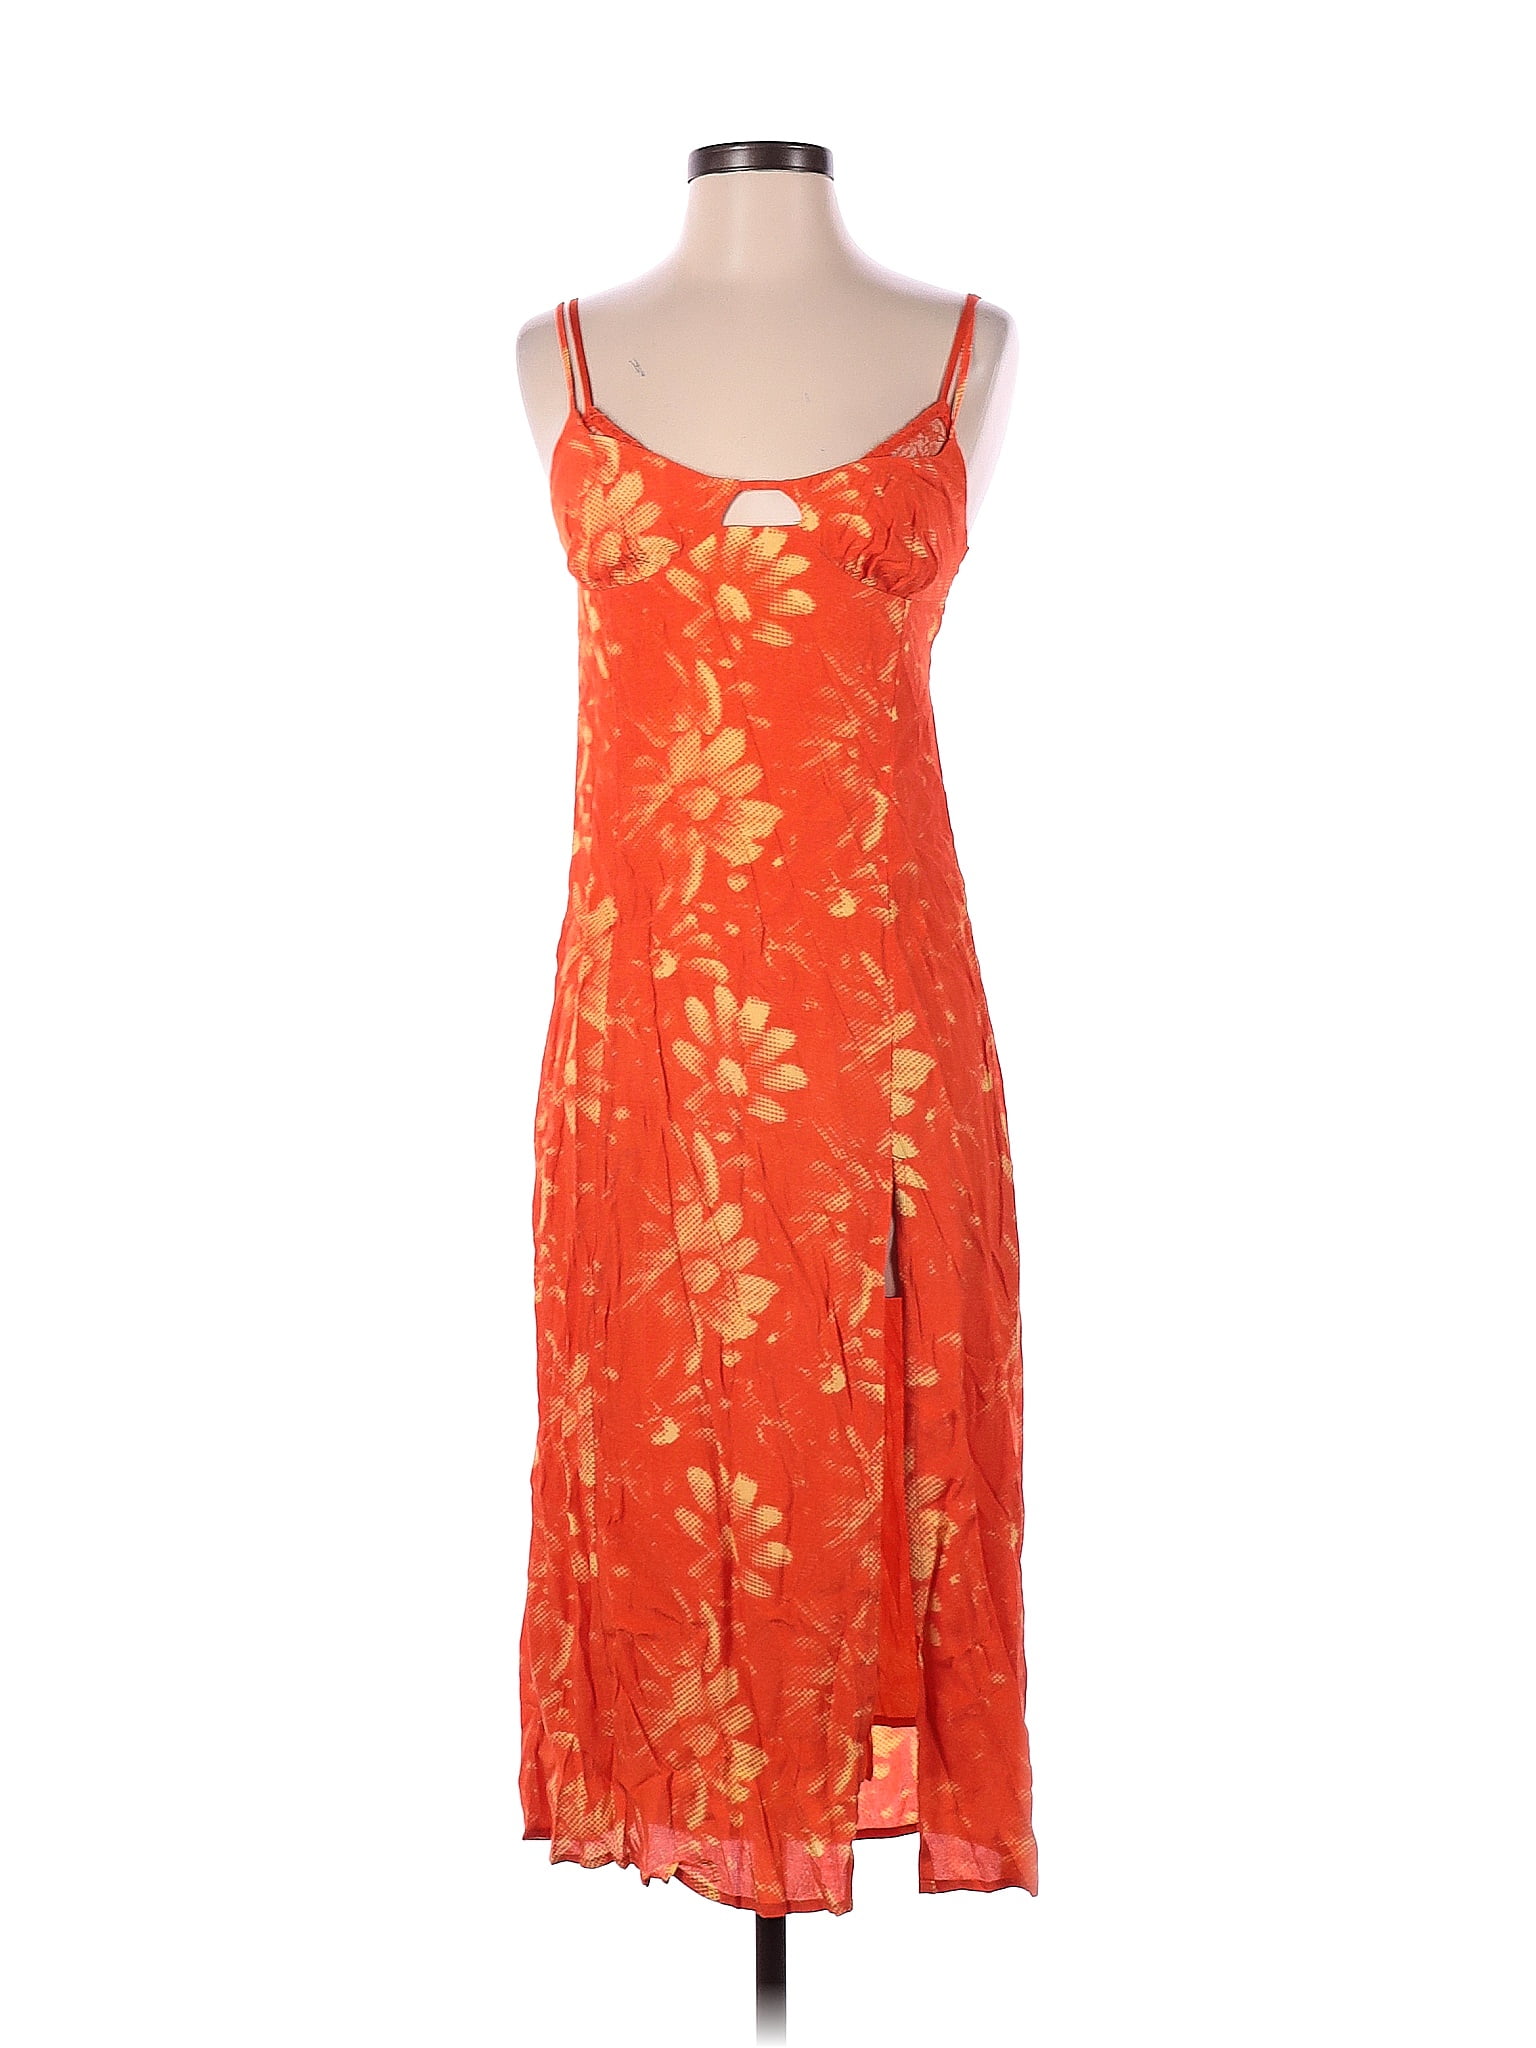 Urban Outfitters 100% Viscose Floral Orange Casual Dress Size S - 53% ...